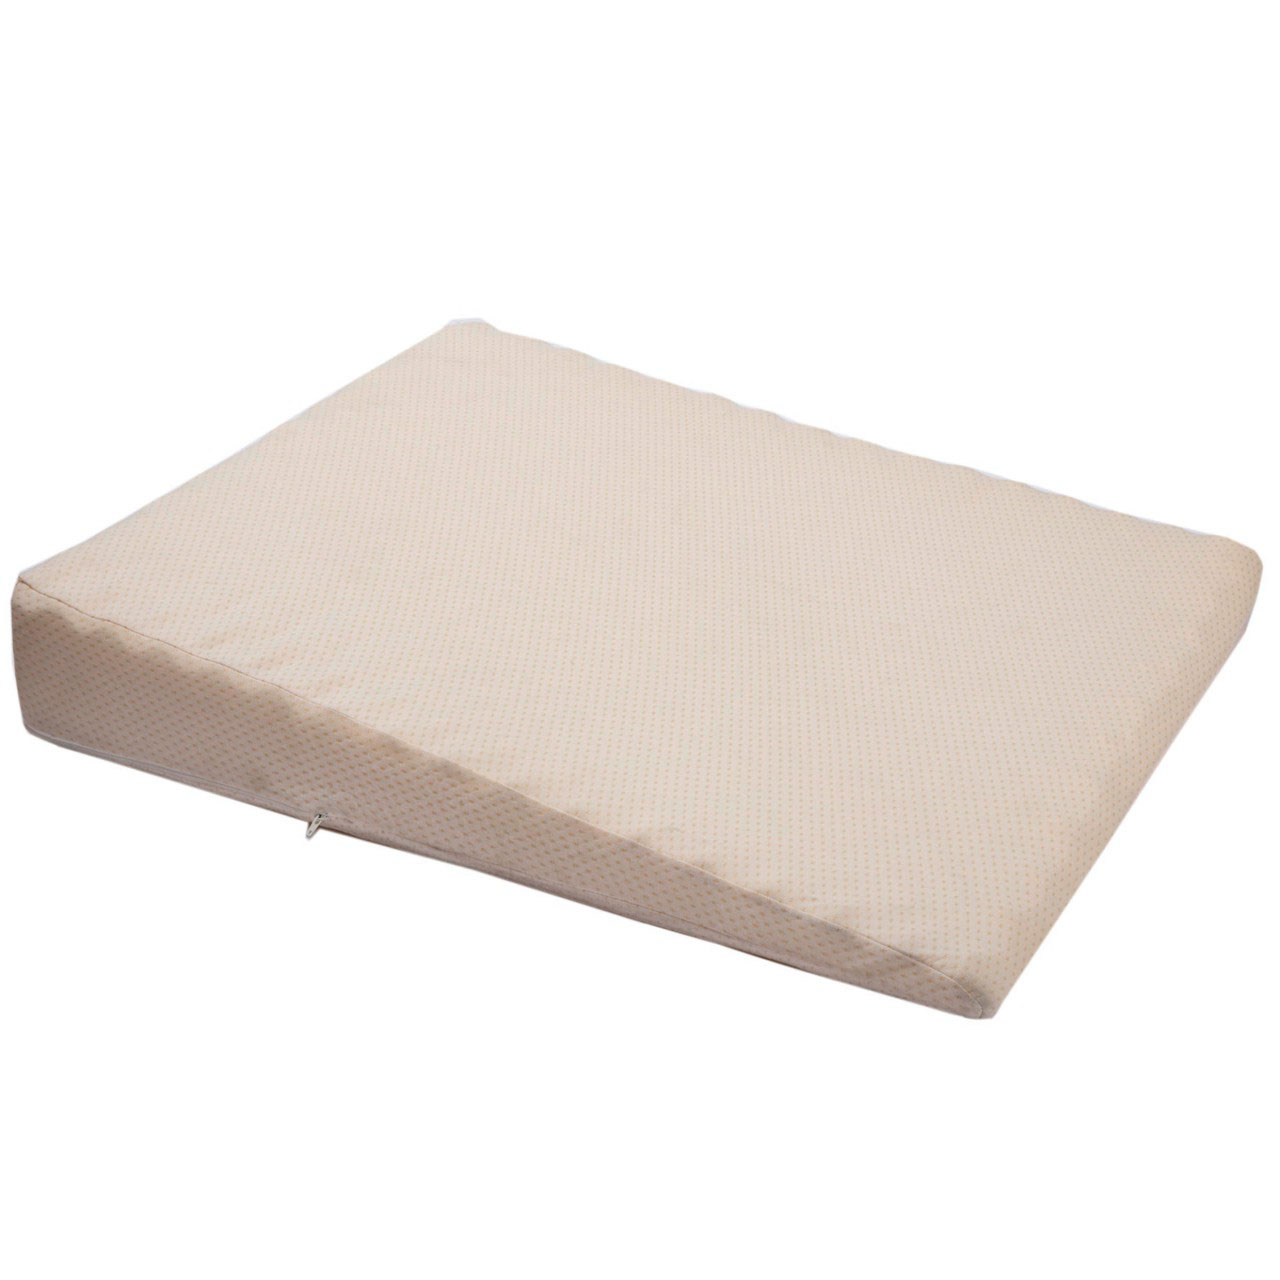 Sleep Wedge Pillow With Removable Cover